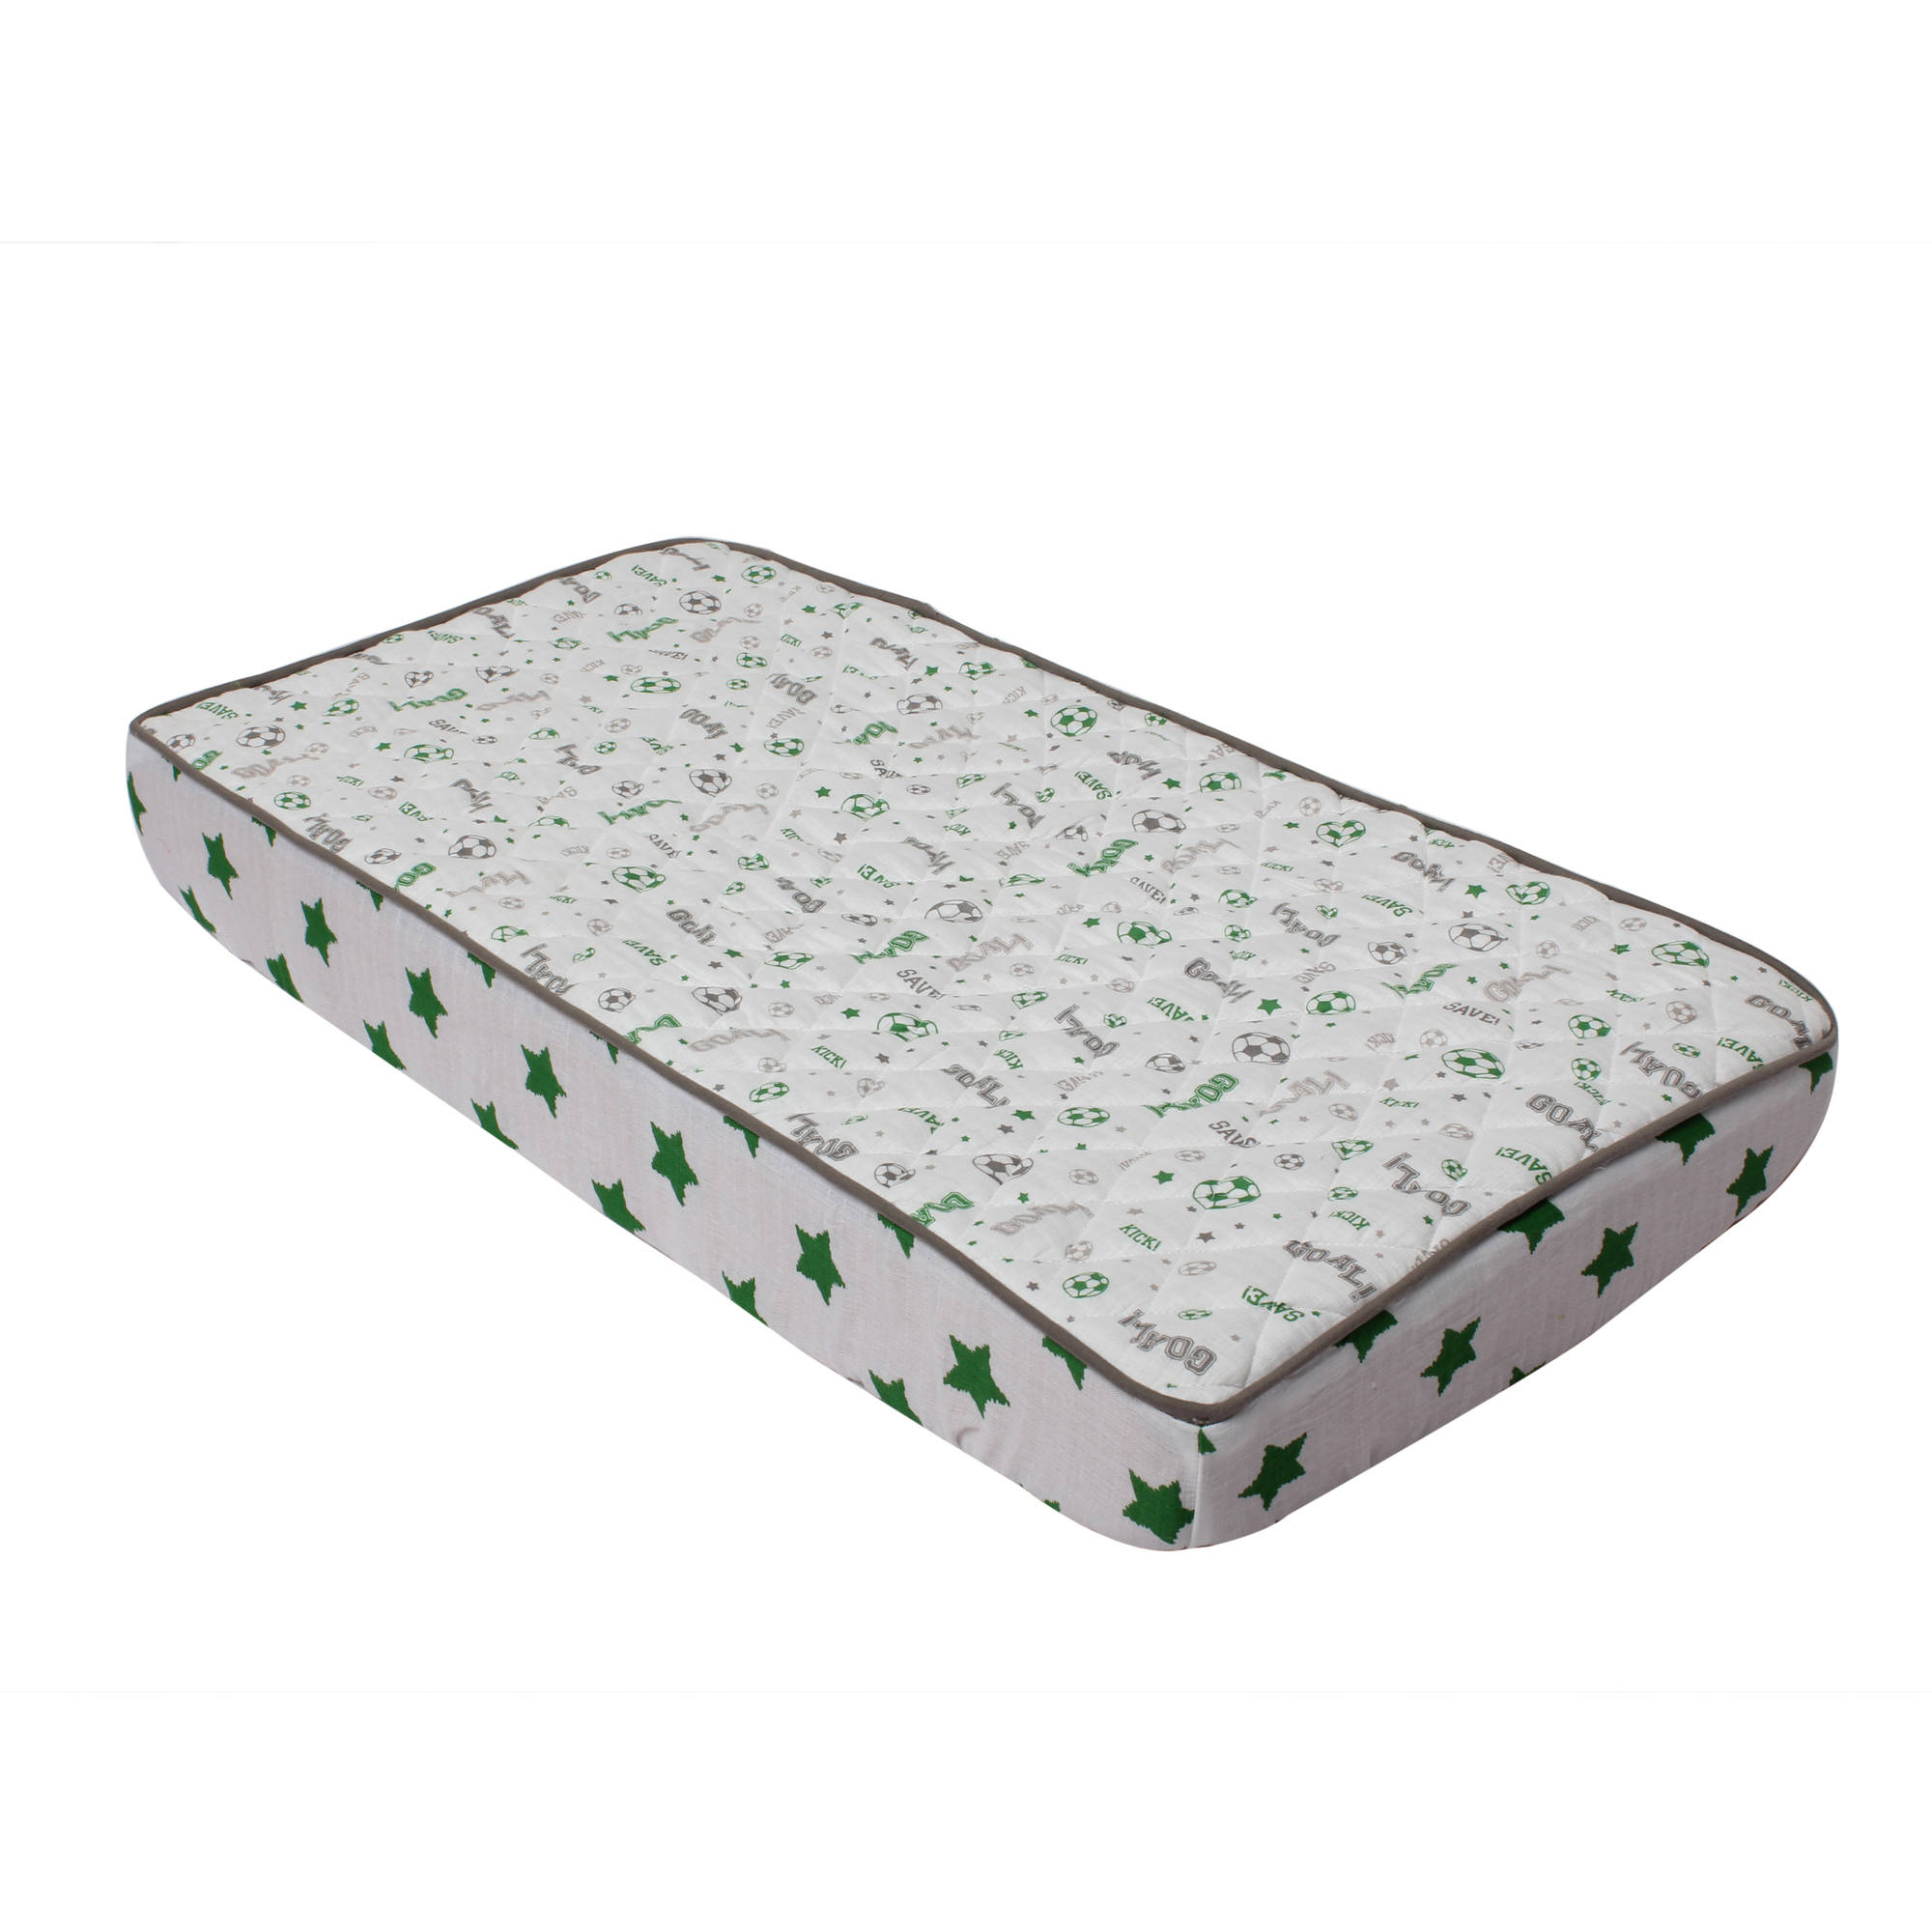 Bacati - Sports Muslin Quilted Top 100% Cotton with poly batting Changing Pad Cover, Soccer Green/Grey - image 1 of 2